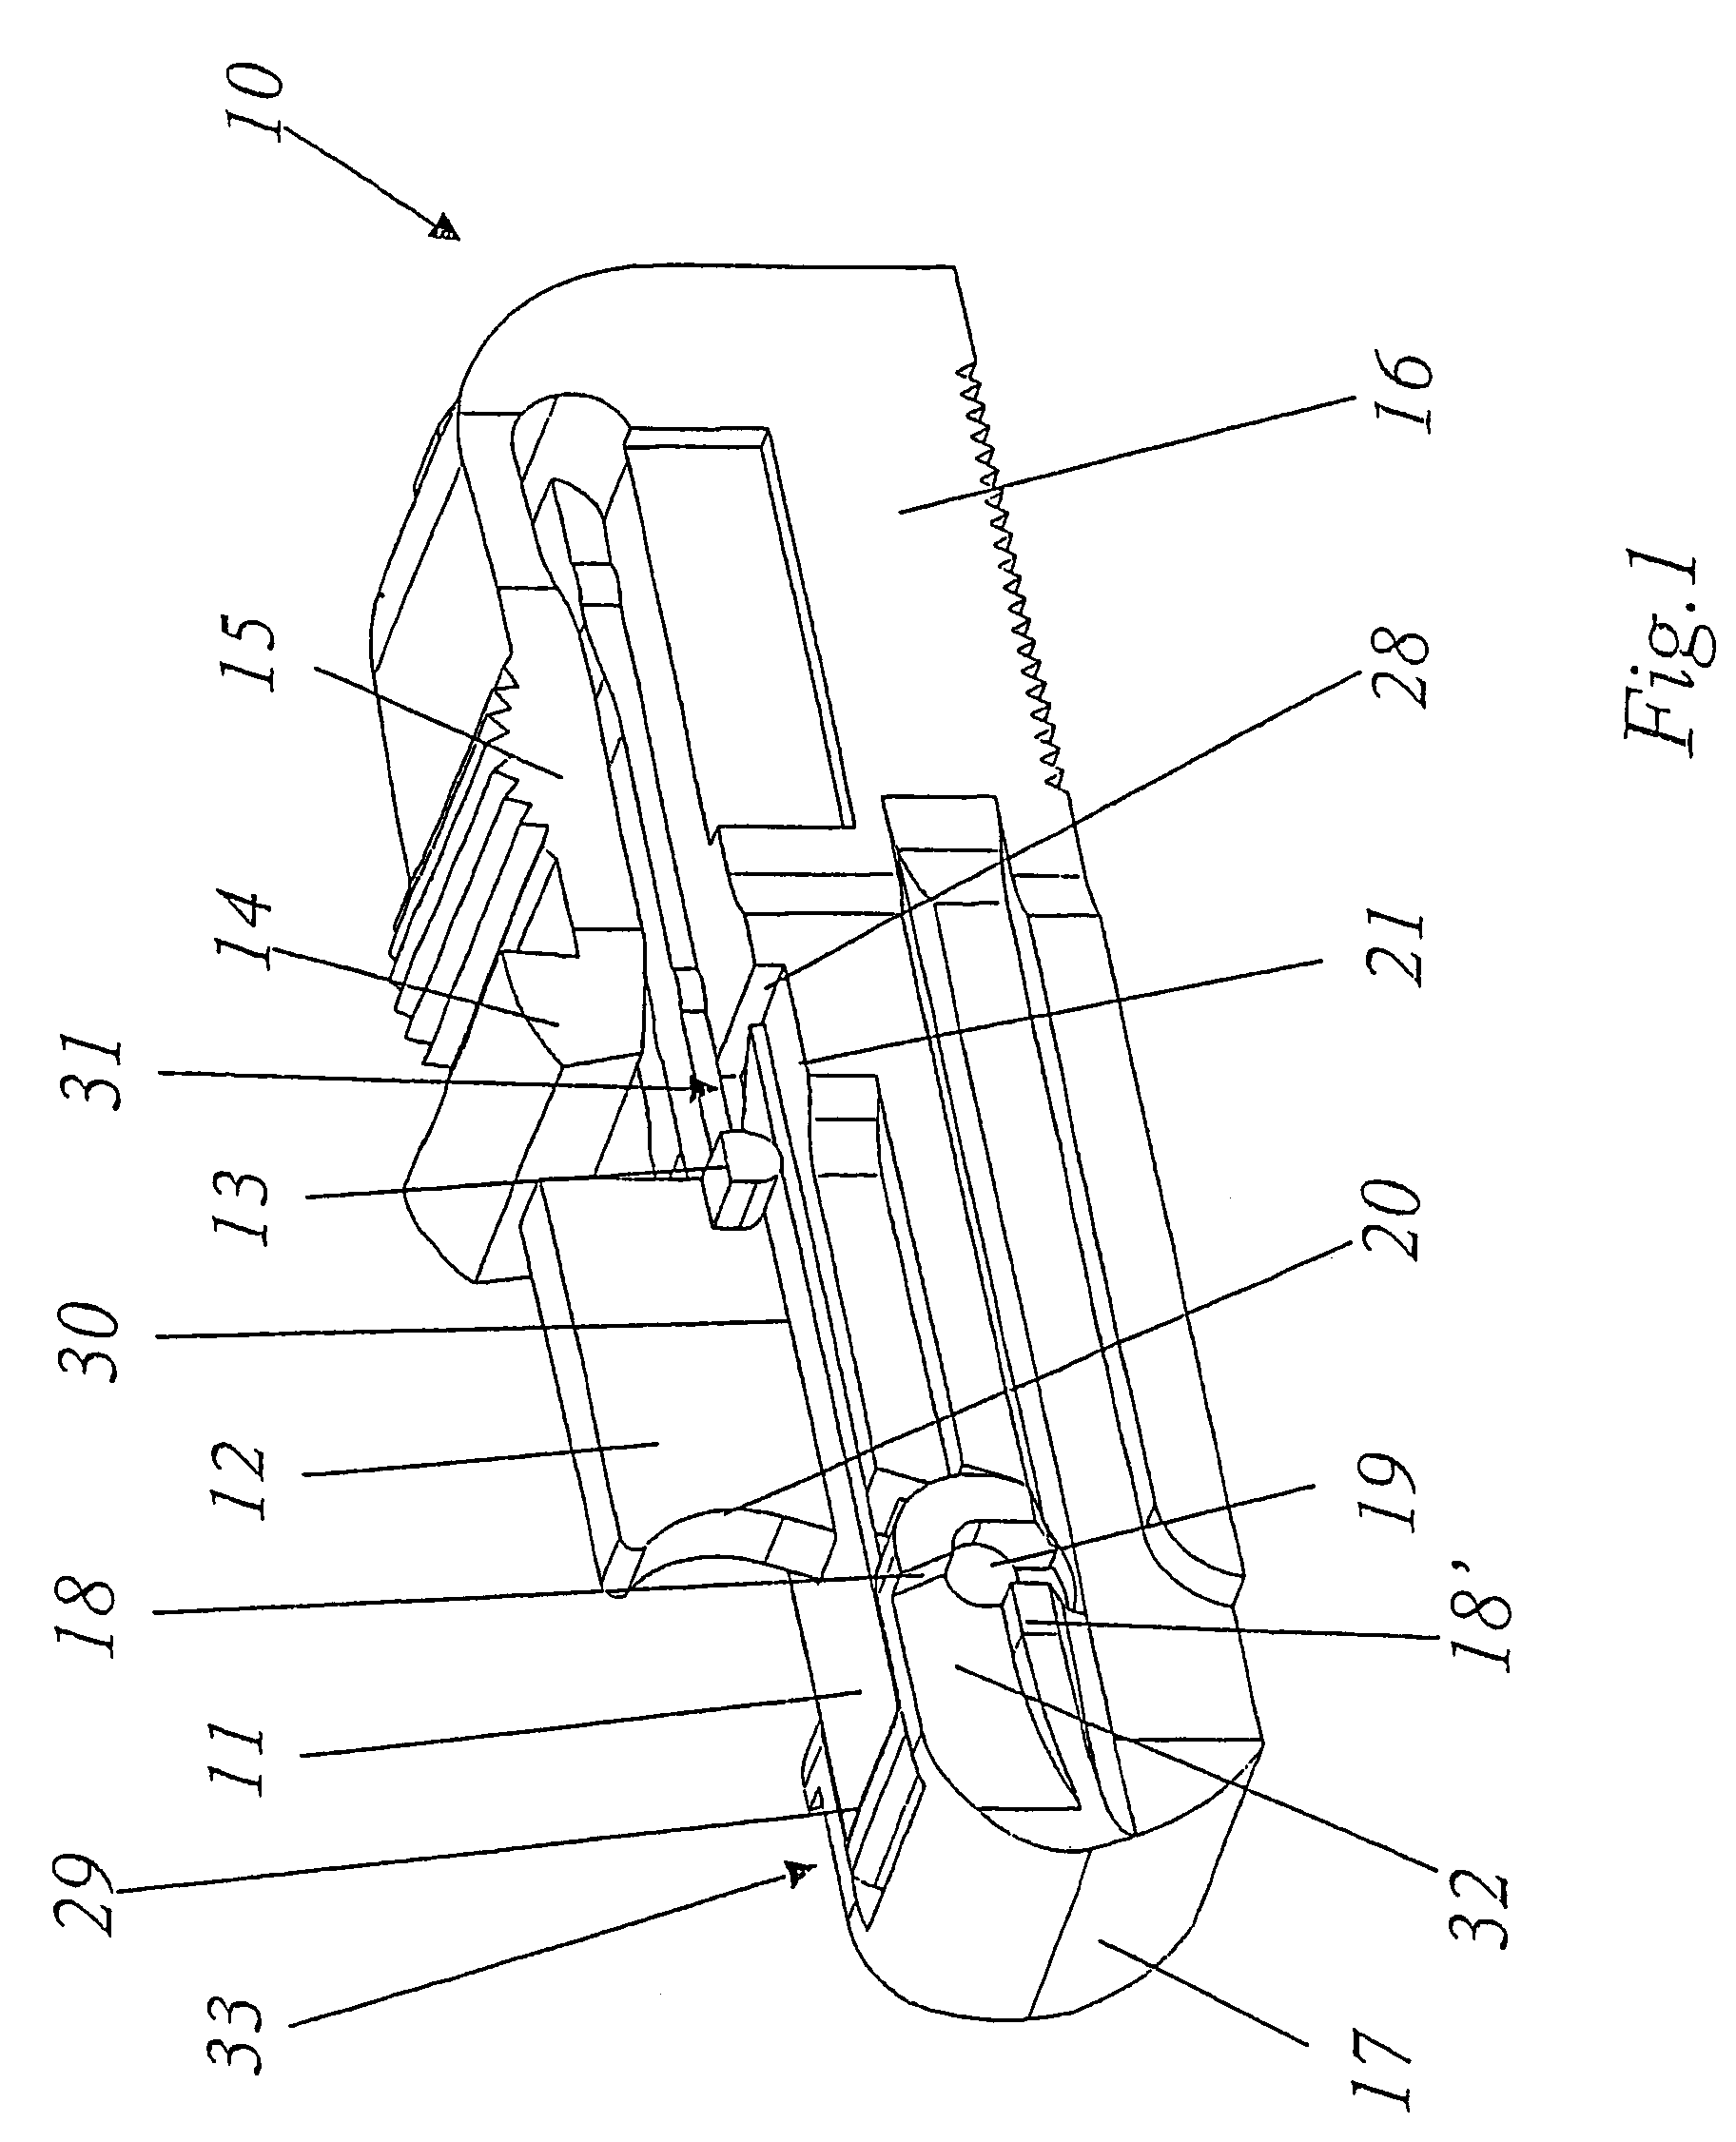 Optical connector with protective cover and leaf spring